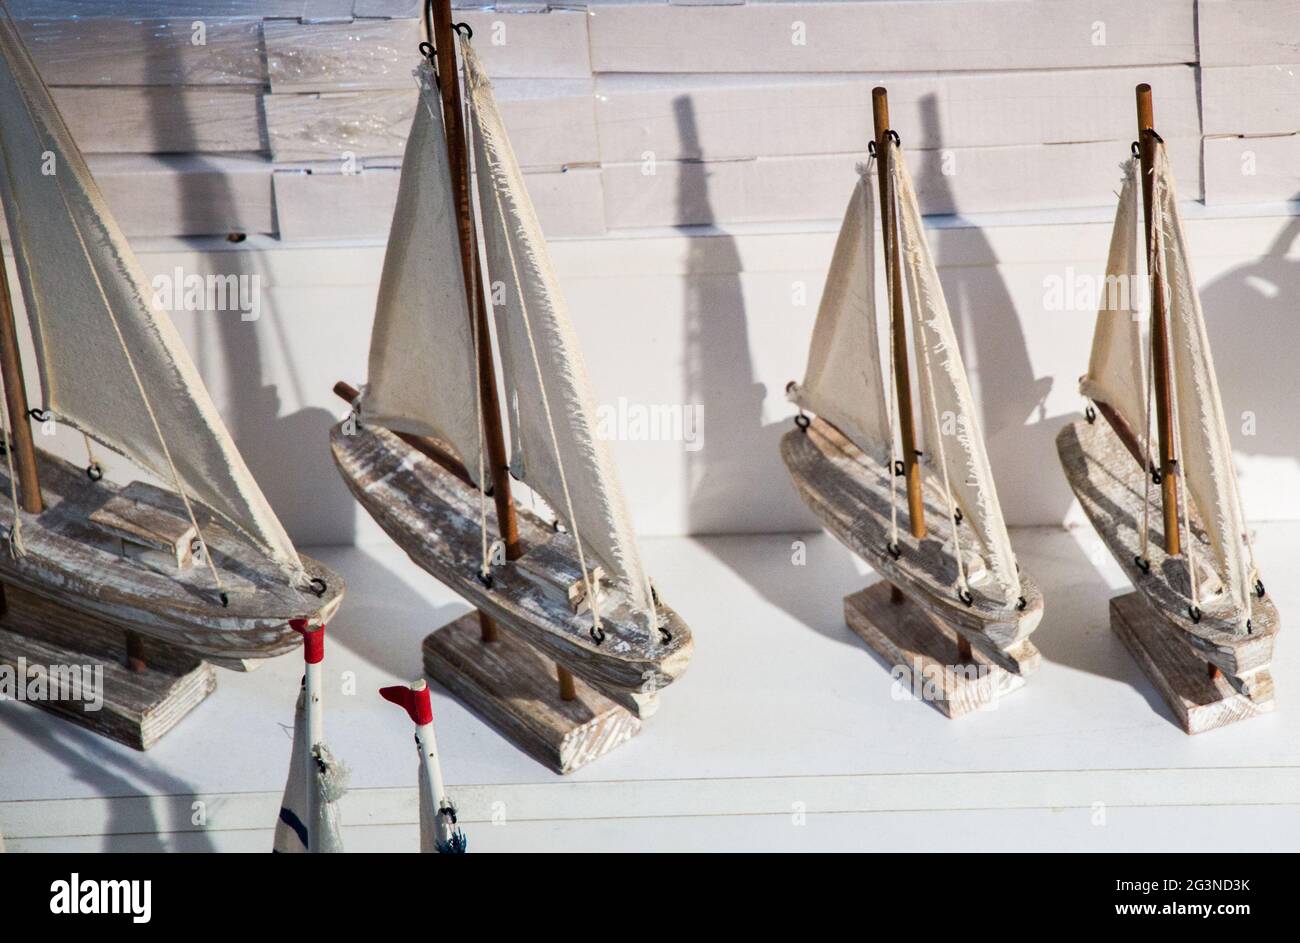 Hand made sail boats in view Stock Photo